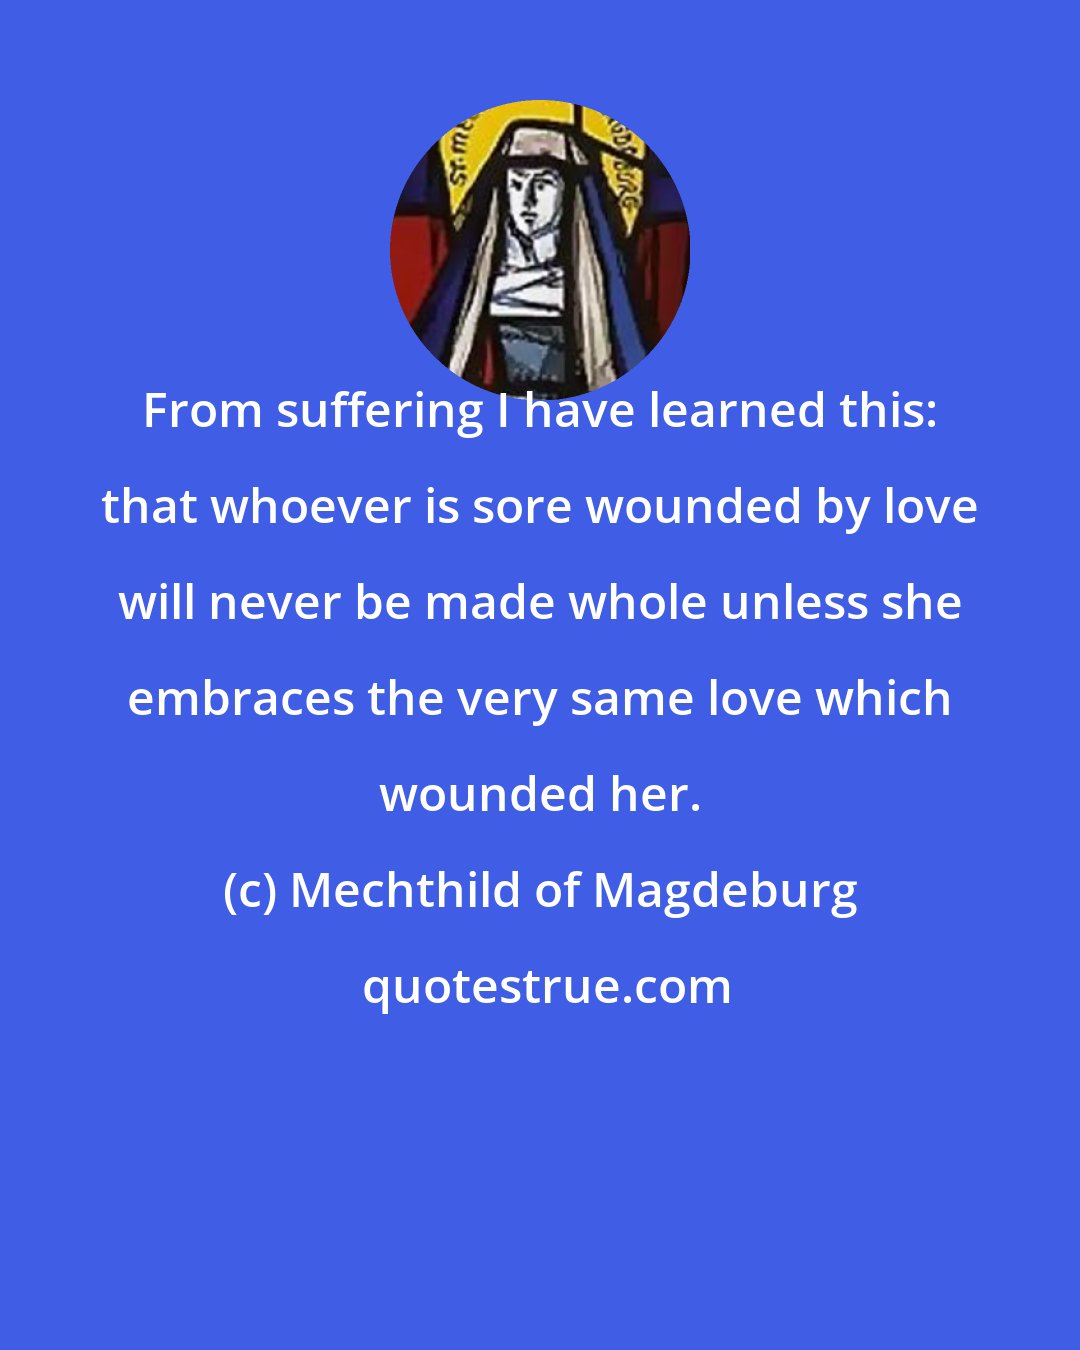 Mechthild of Magdeburg: From suffering I have learned this: that whoever is sore wounded by love will never be made whole unless she embraces the very same love which wounded her.